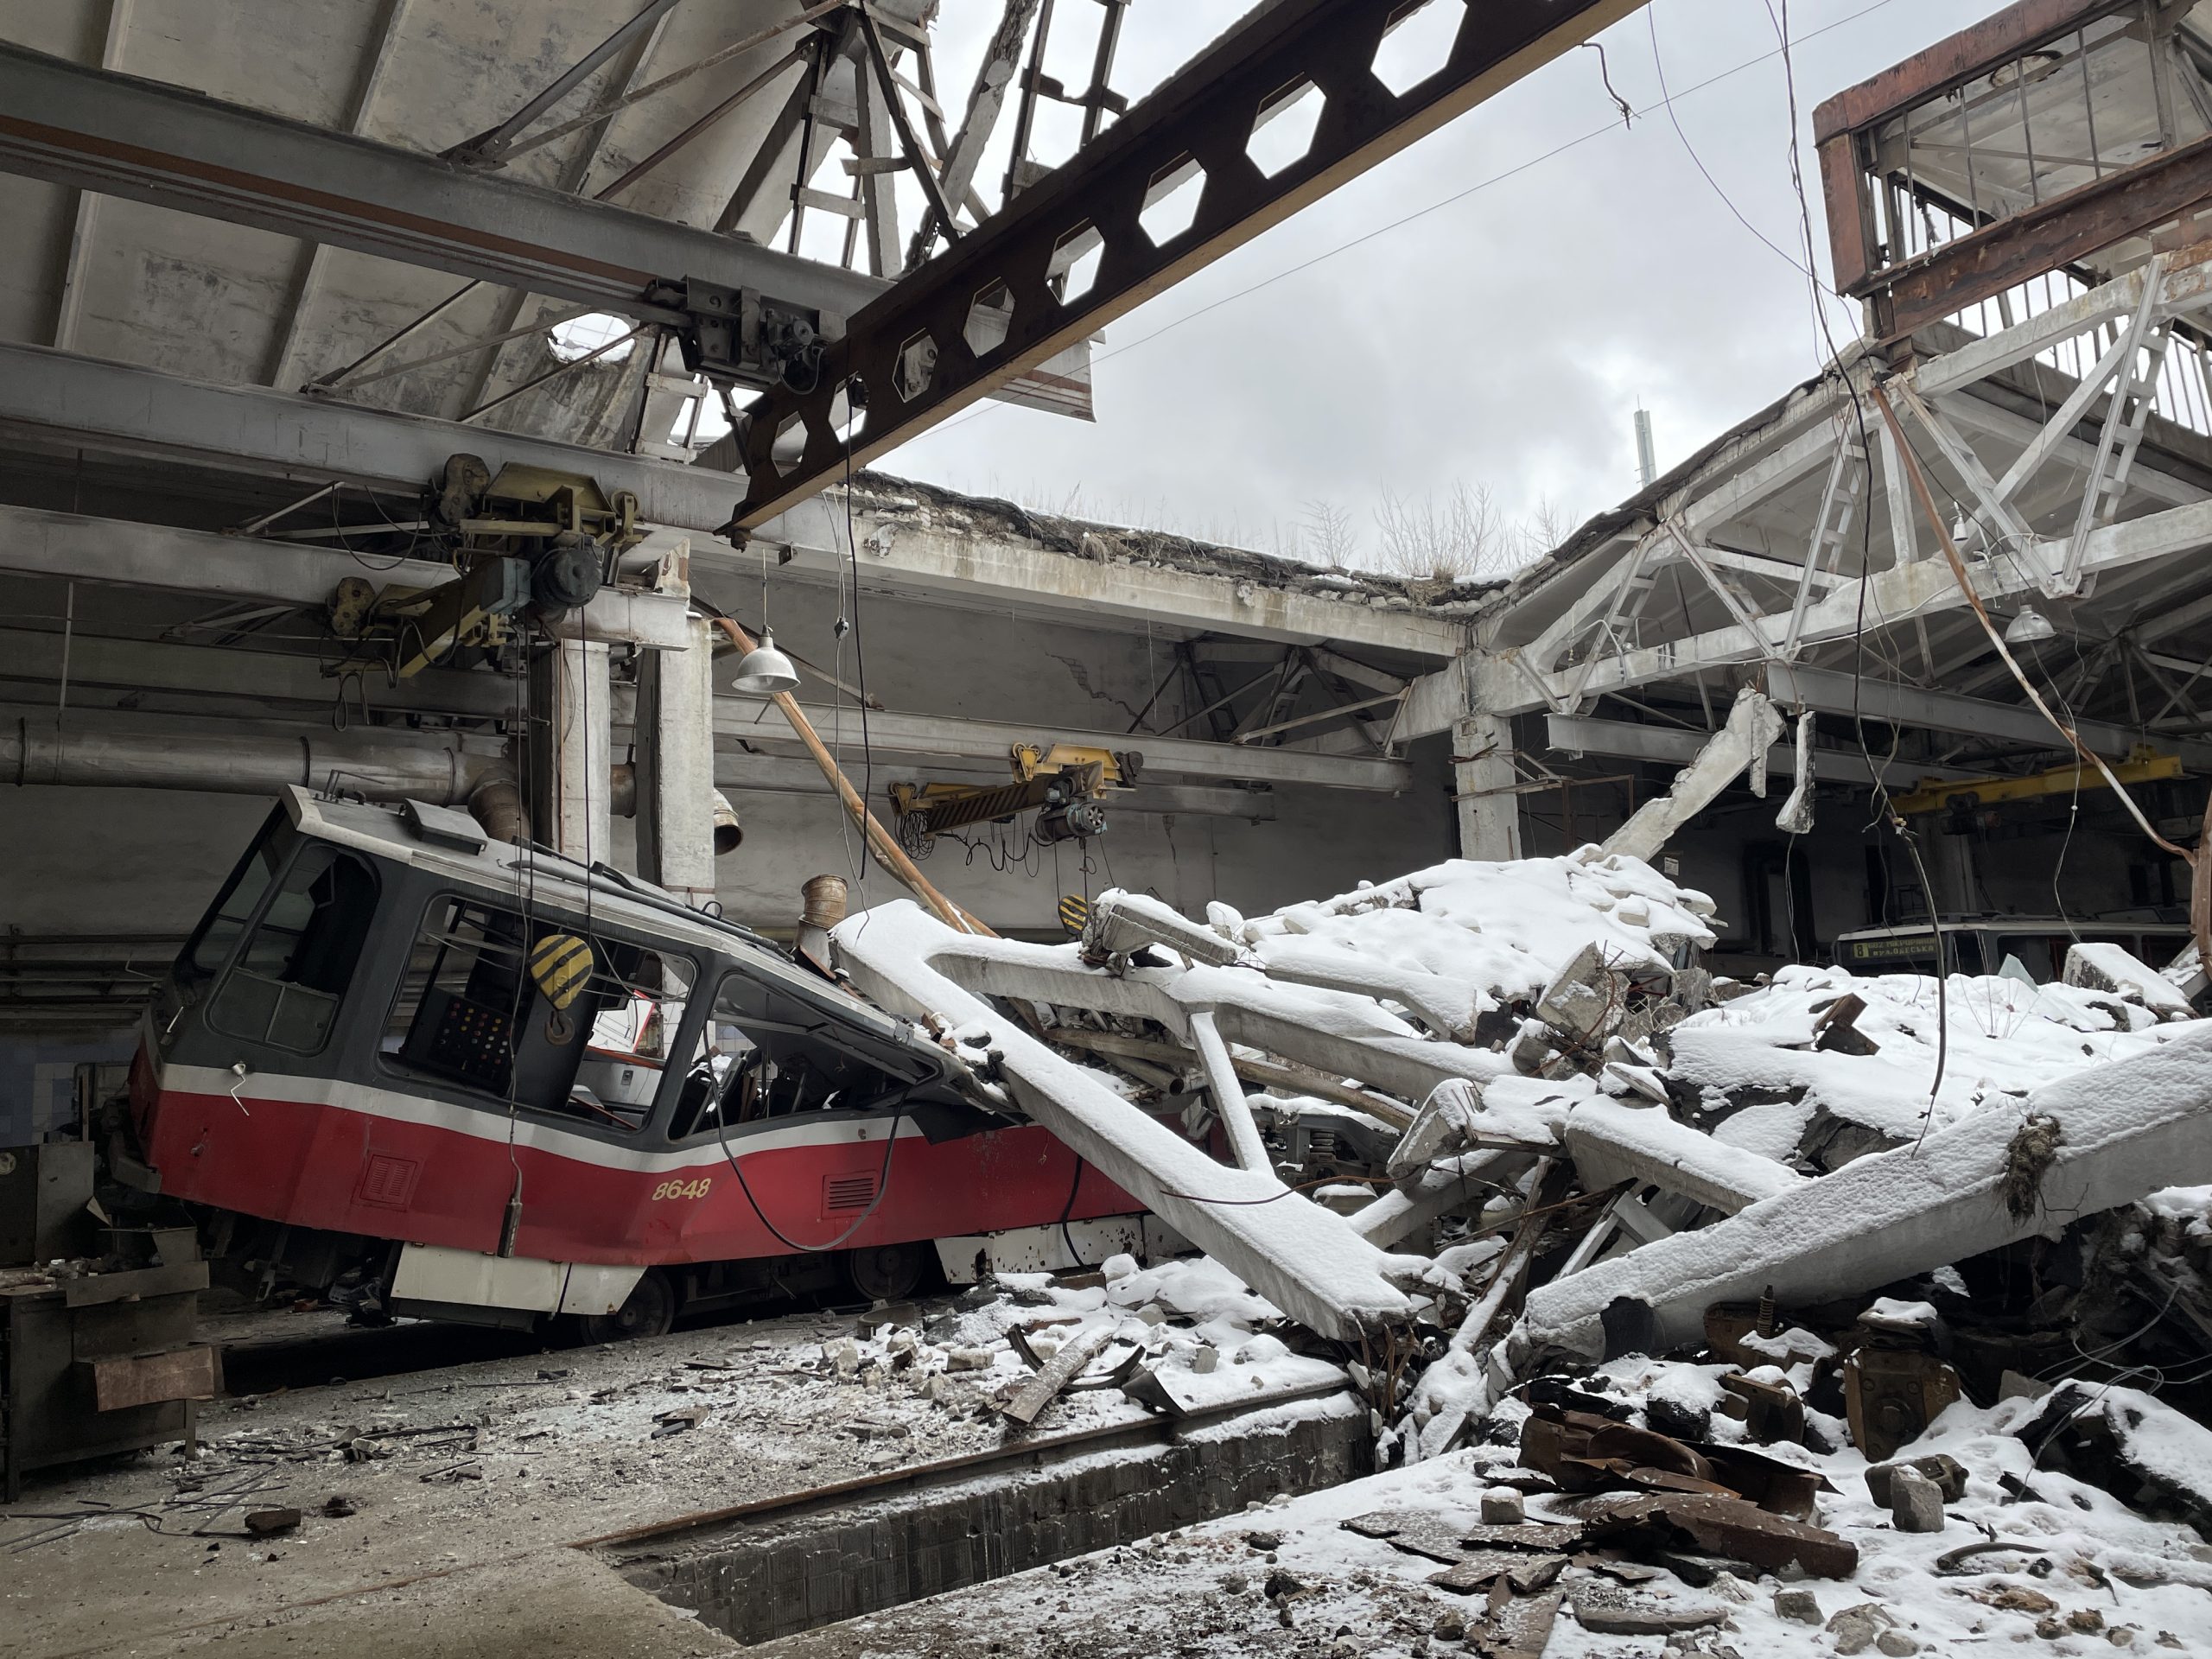 A historical Czech train destroyed in a Saltivka train depot a year after the shelling started.